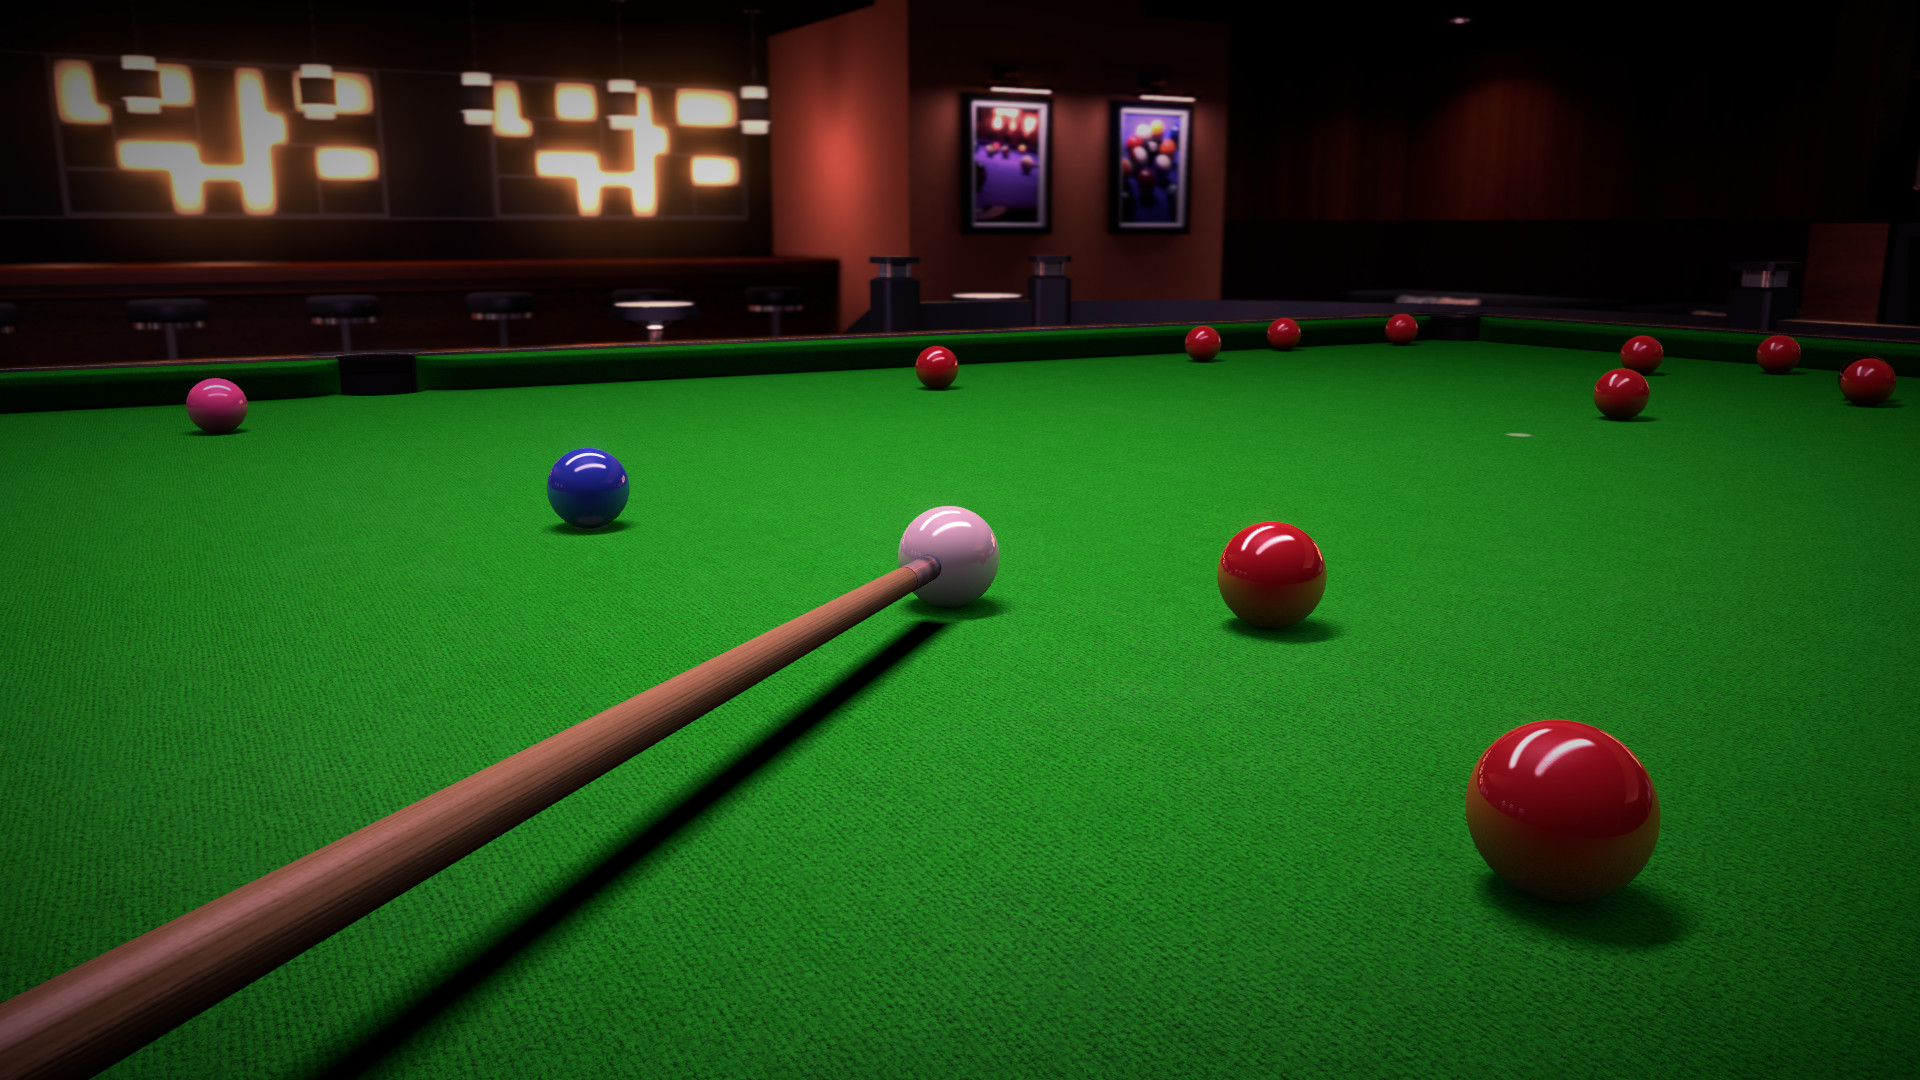 Save 65% on Pure Pool - Snooker pack on Steam